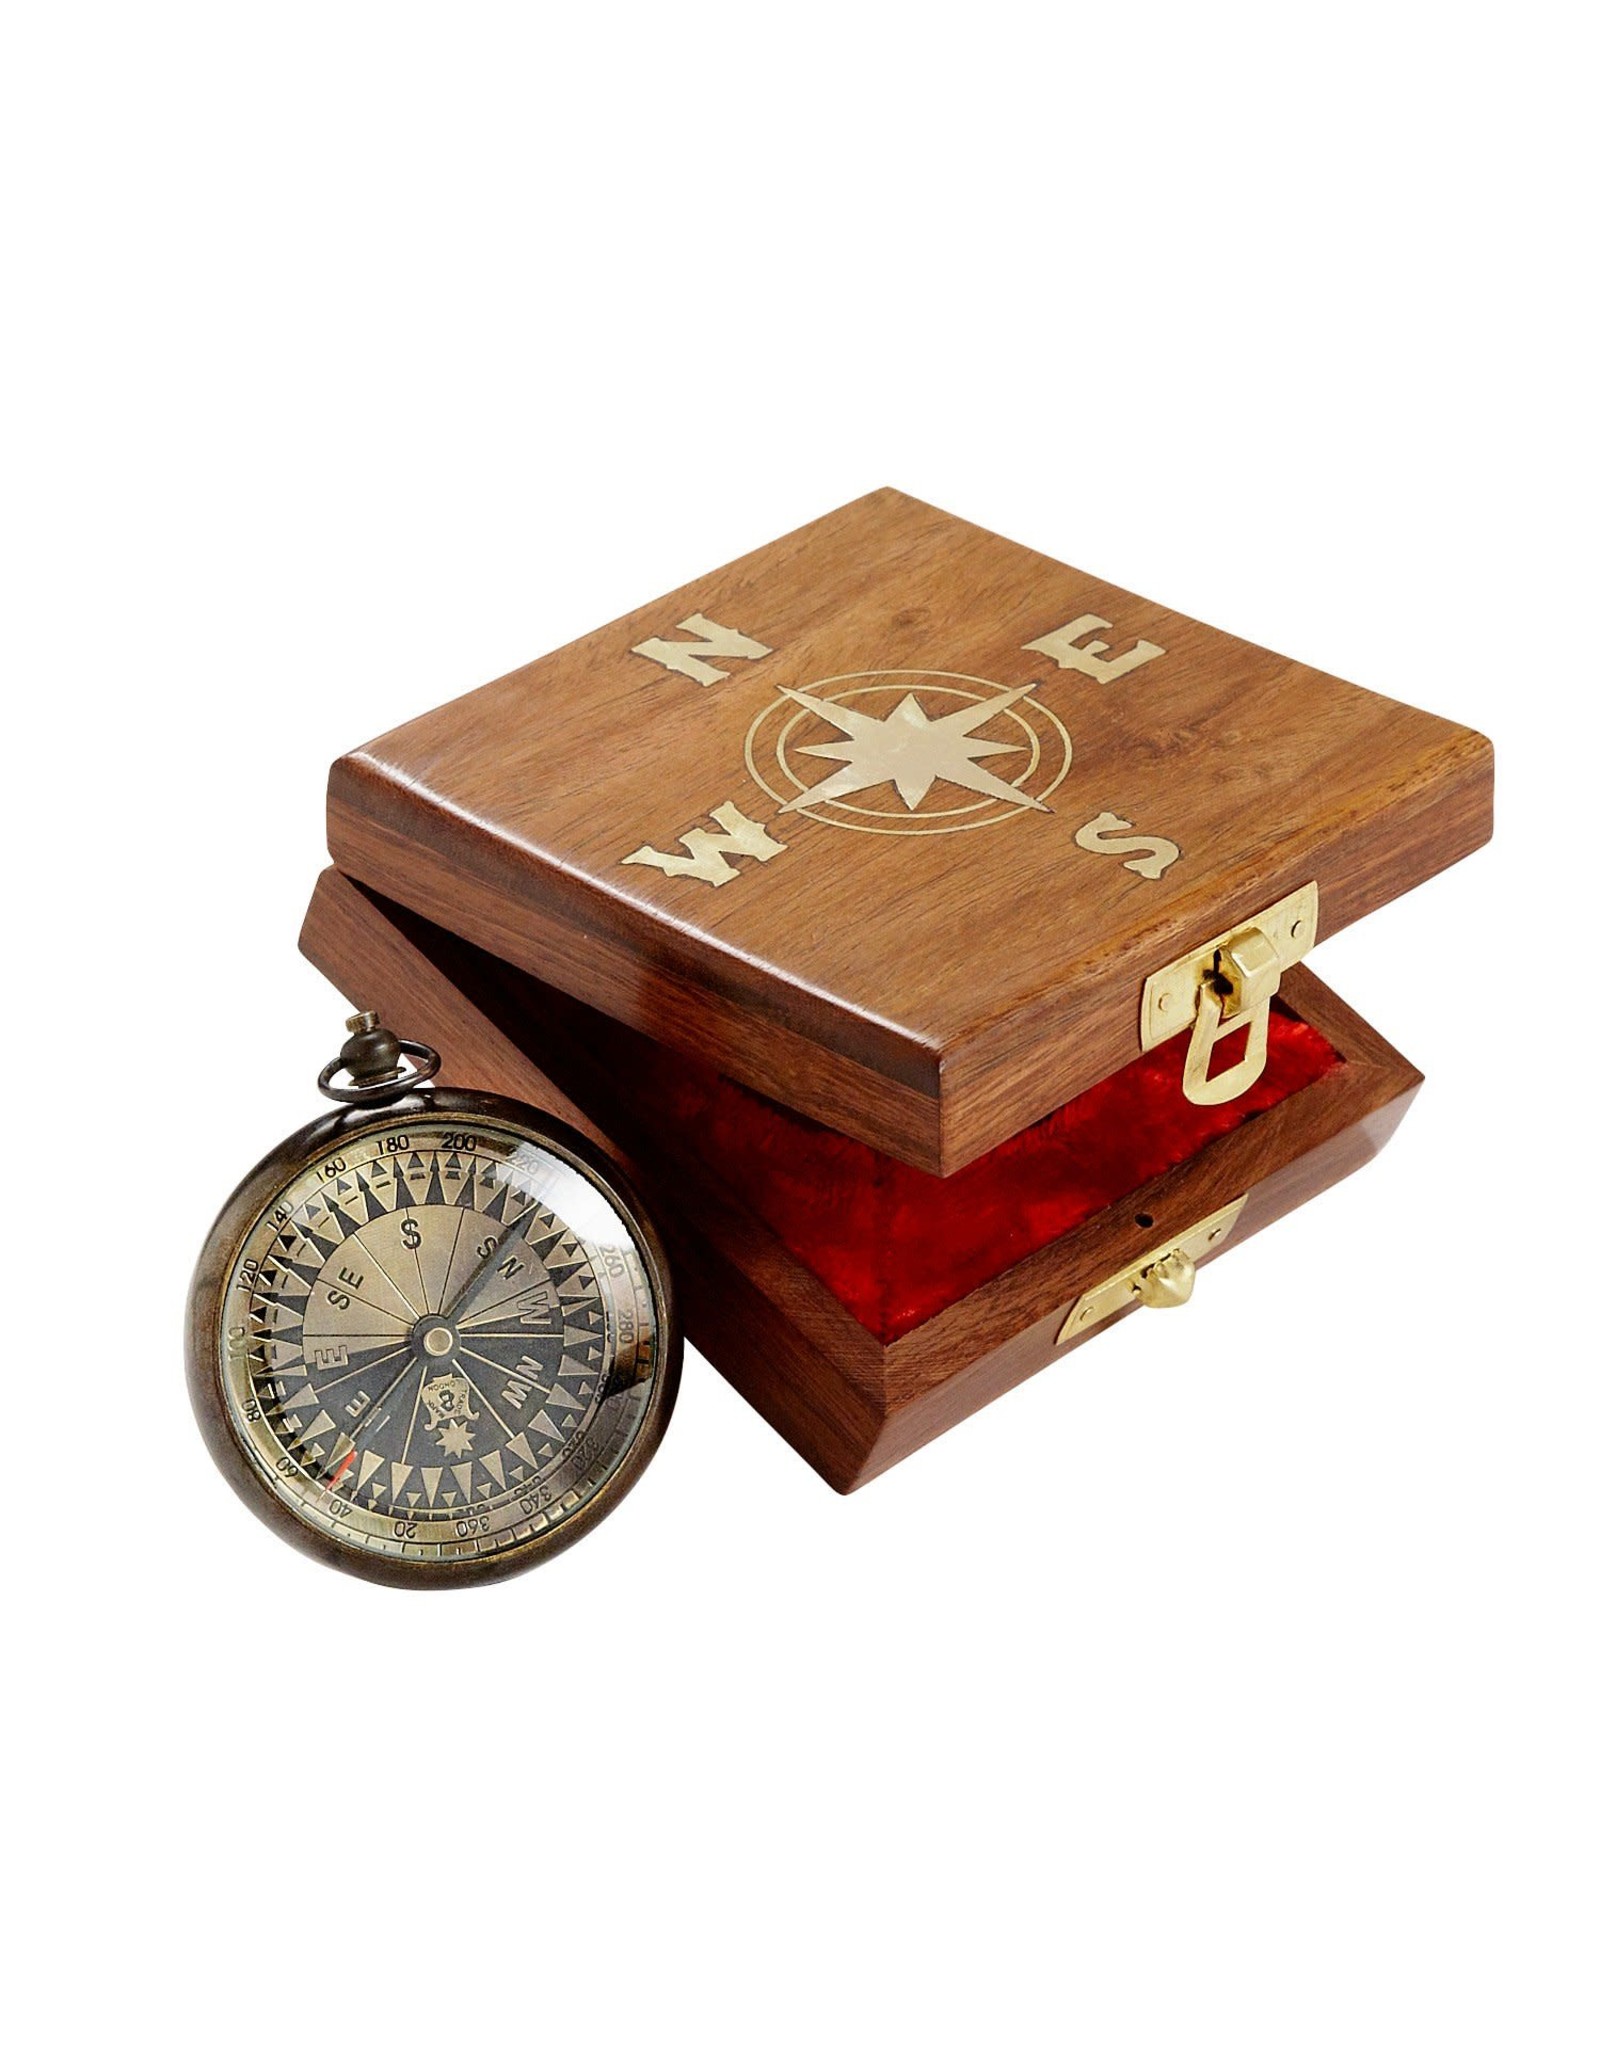 Trade roots True North Compass in Wood Box, India